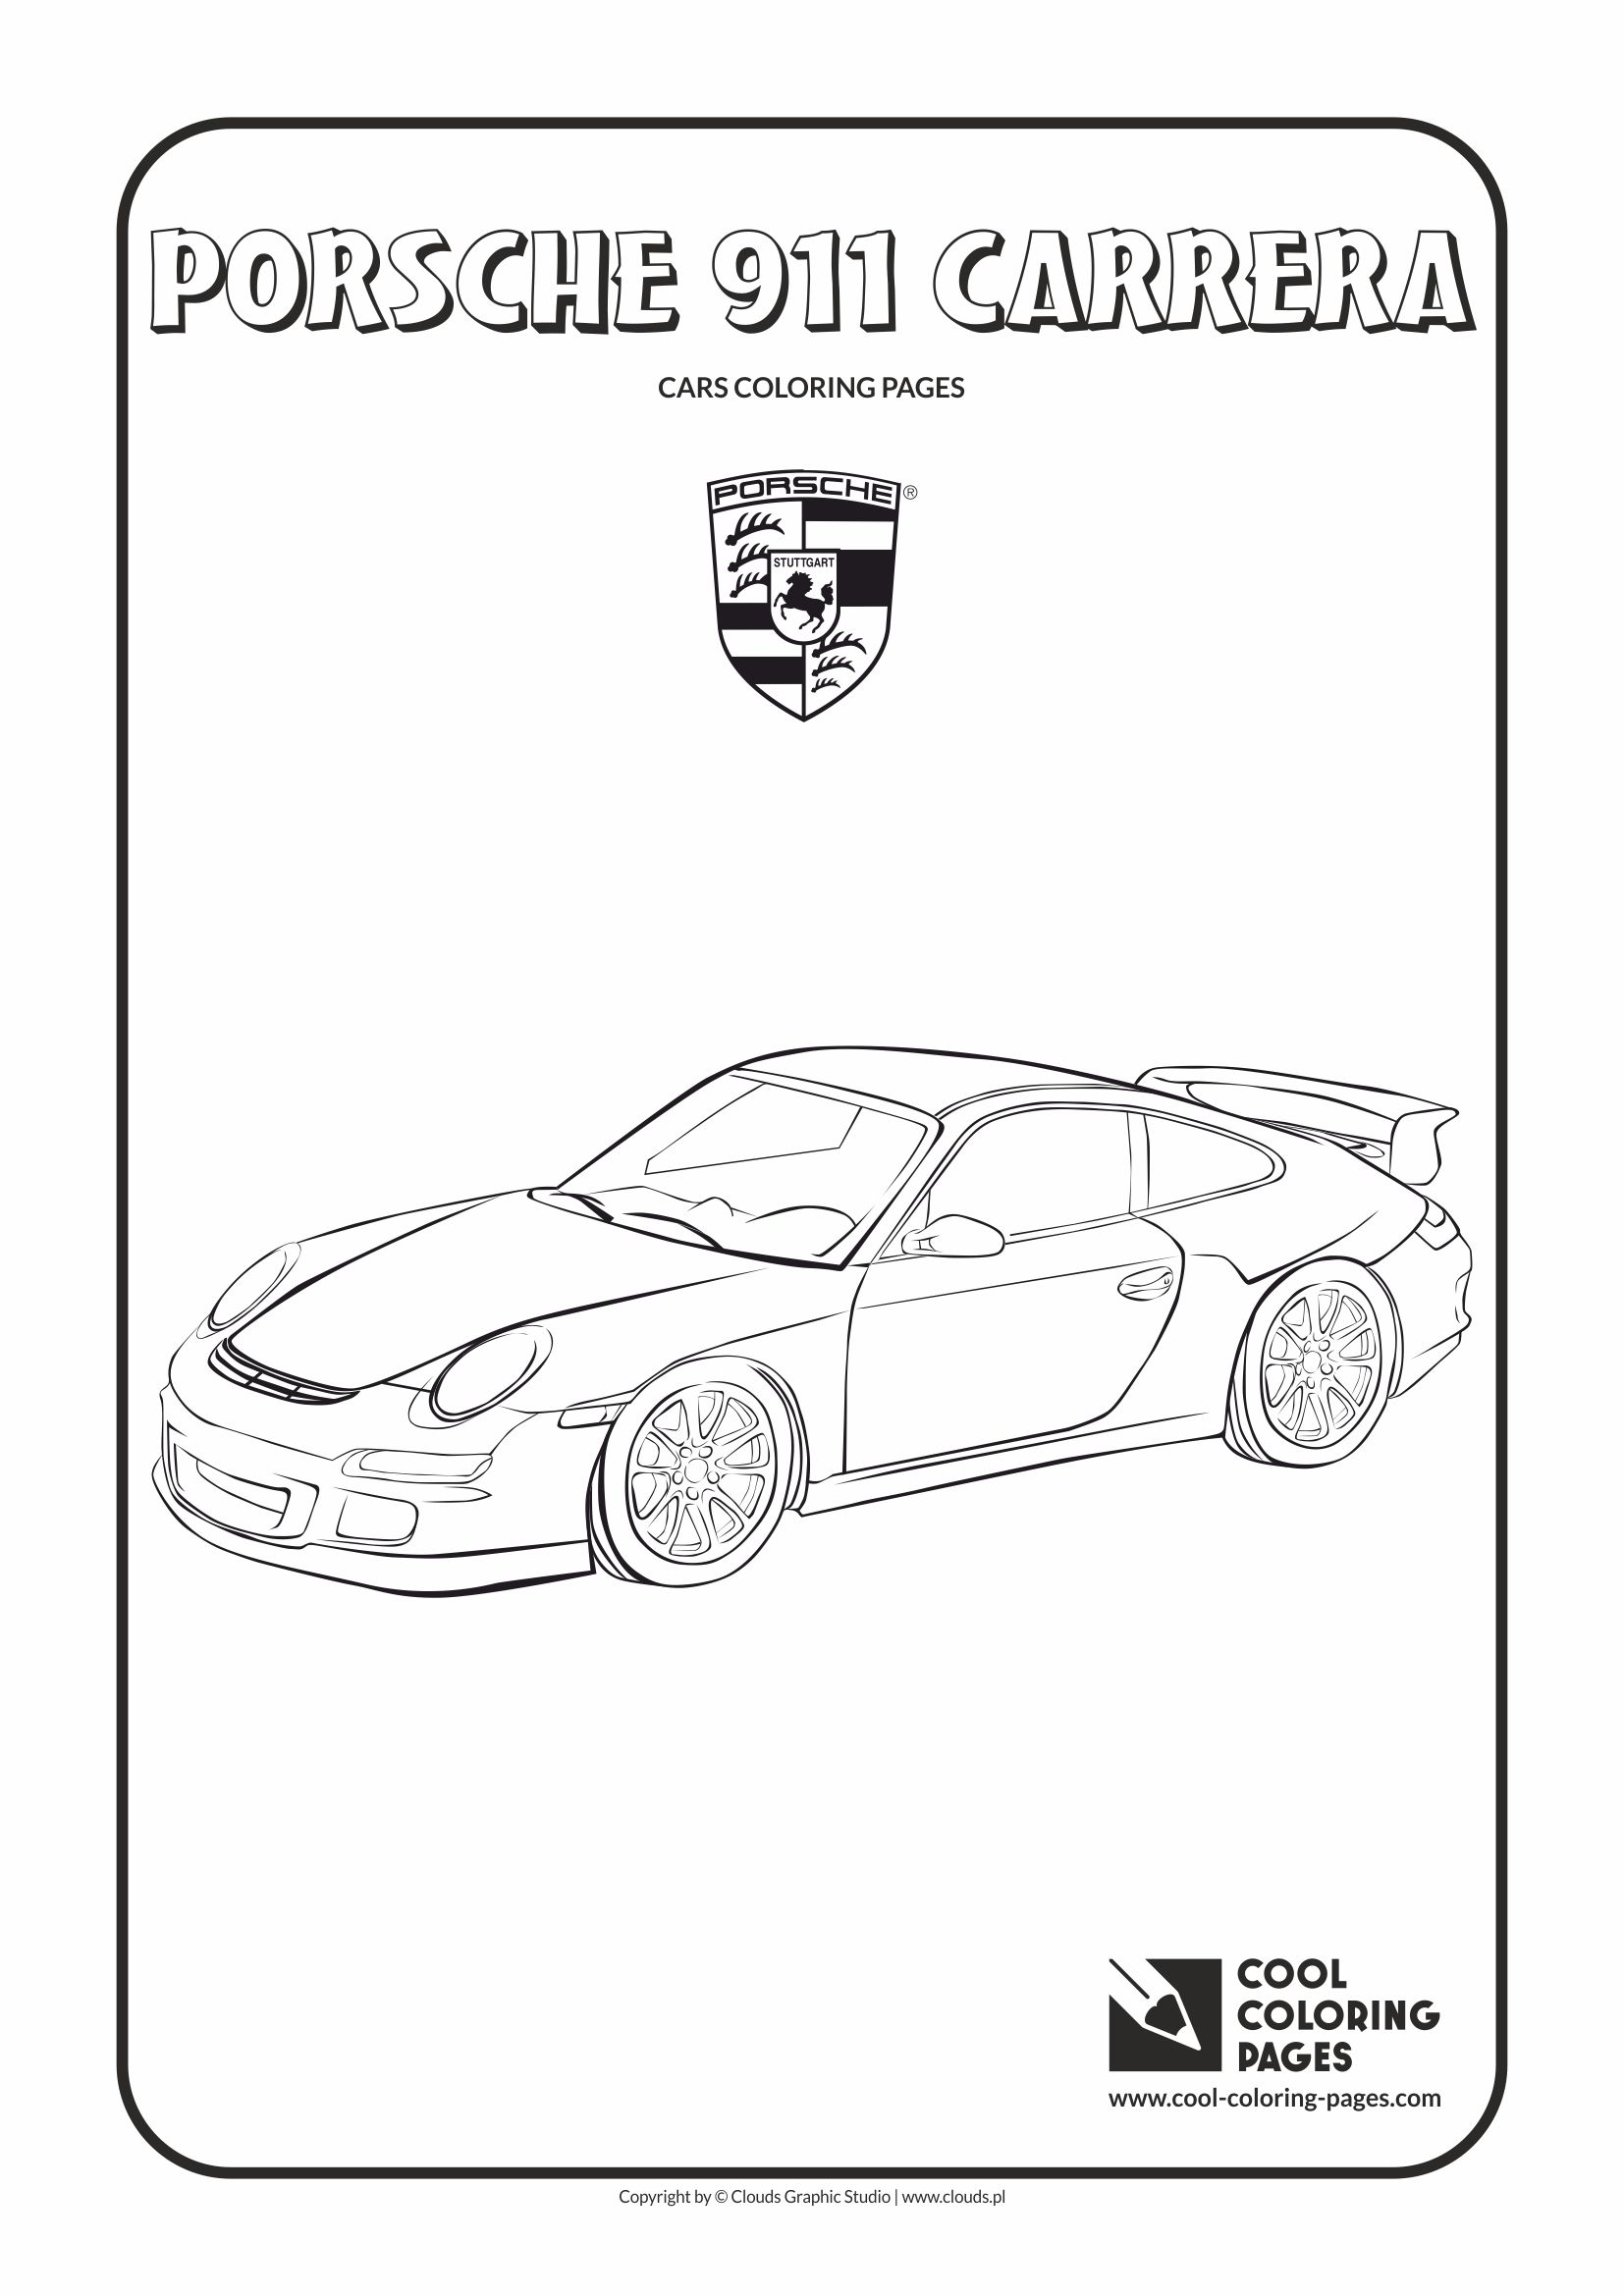 Cool Coloring Pages - Vehicles / Porsche 911 Carrera / Coloring page with Porsche 911 Carrera